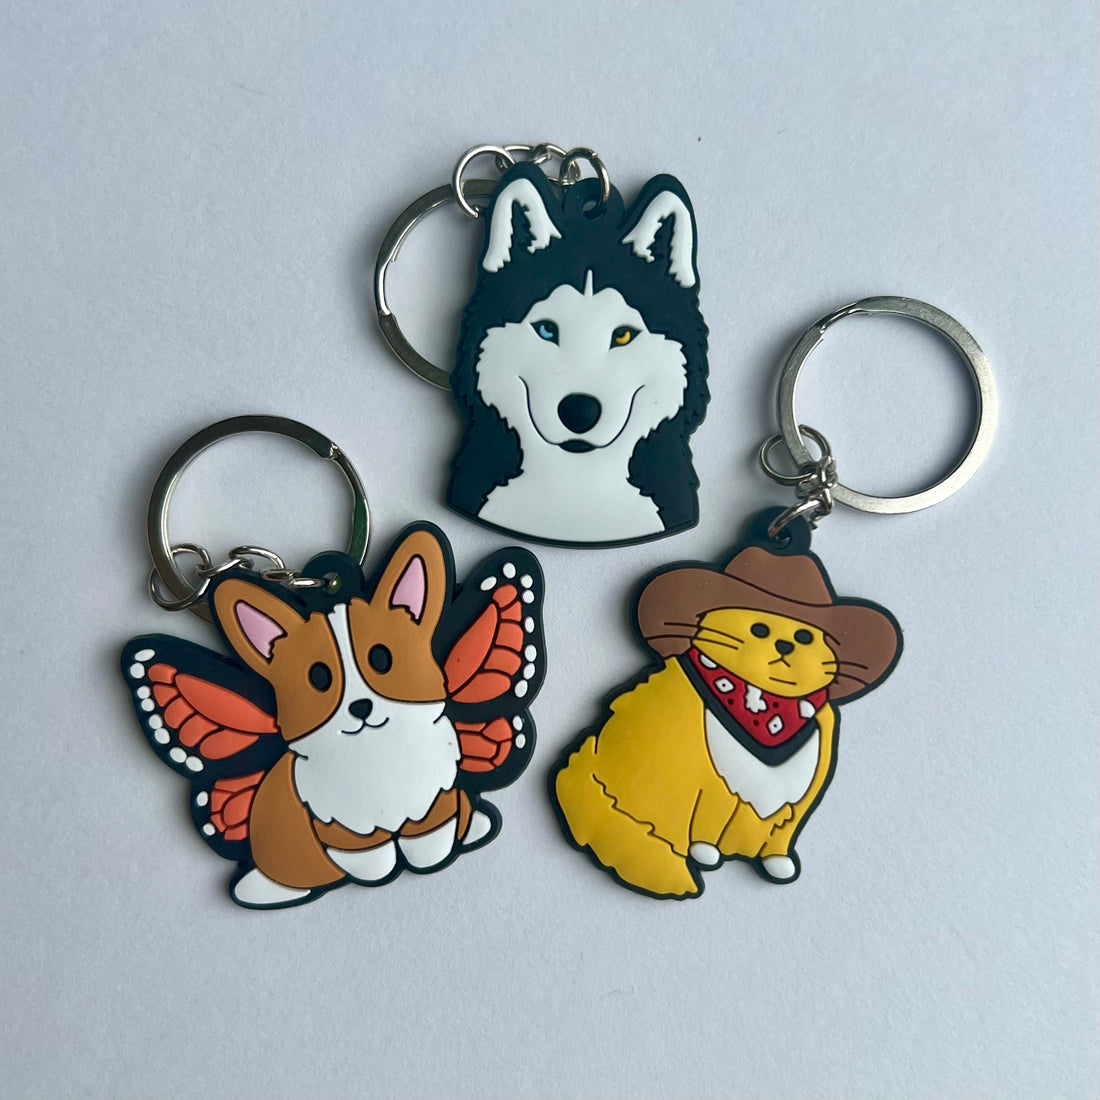 The Cute Animal Keyring Charms Pack